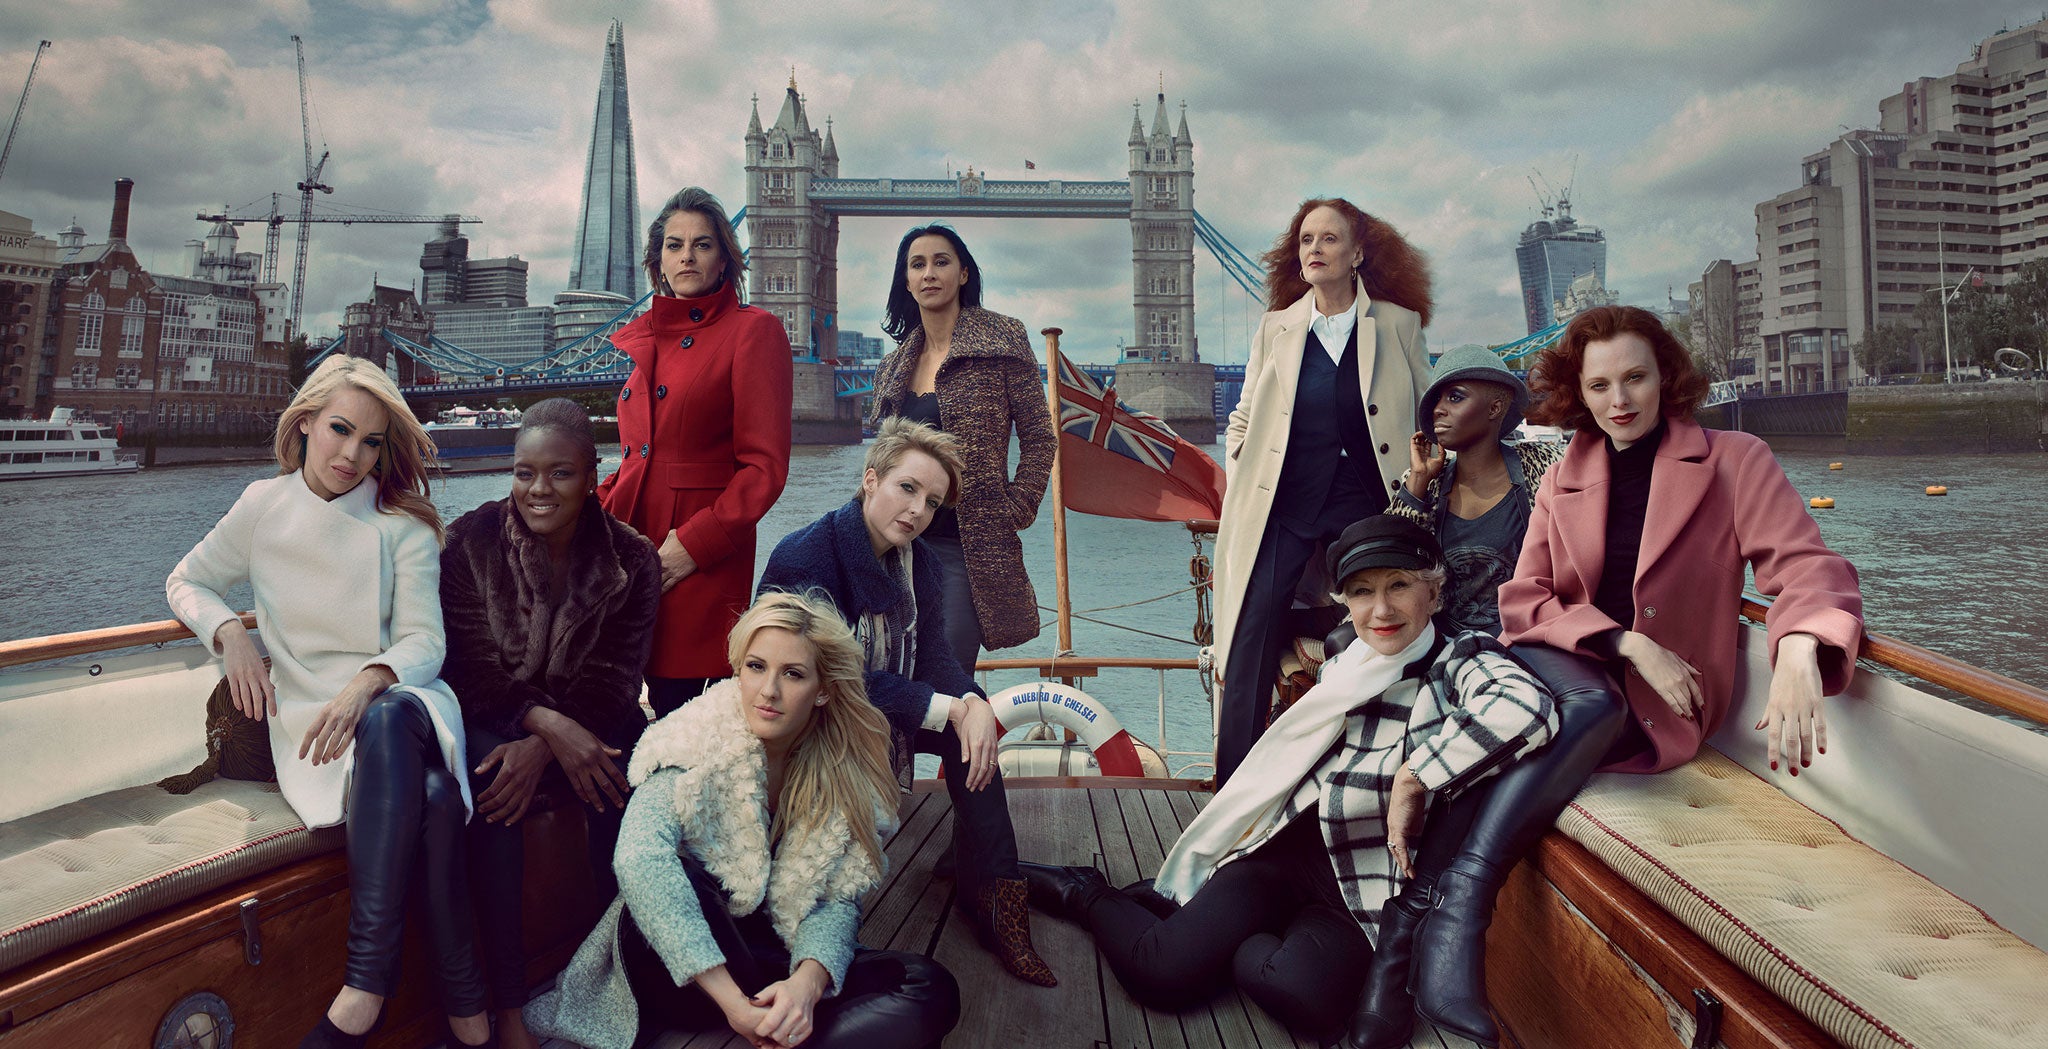 Tracey Emin and others in Marks & Spencer's 'leading ladies’ campaign'